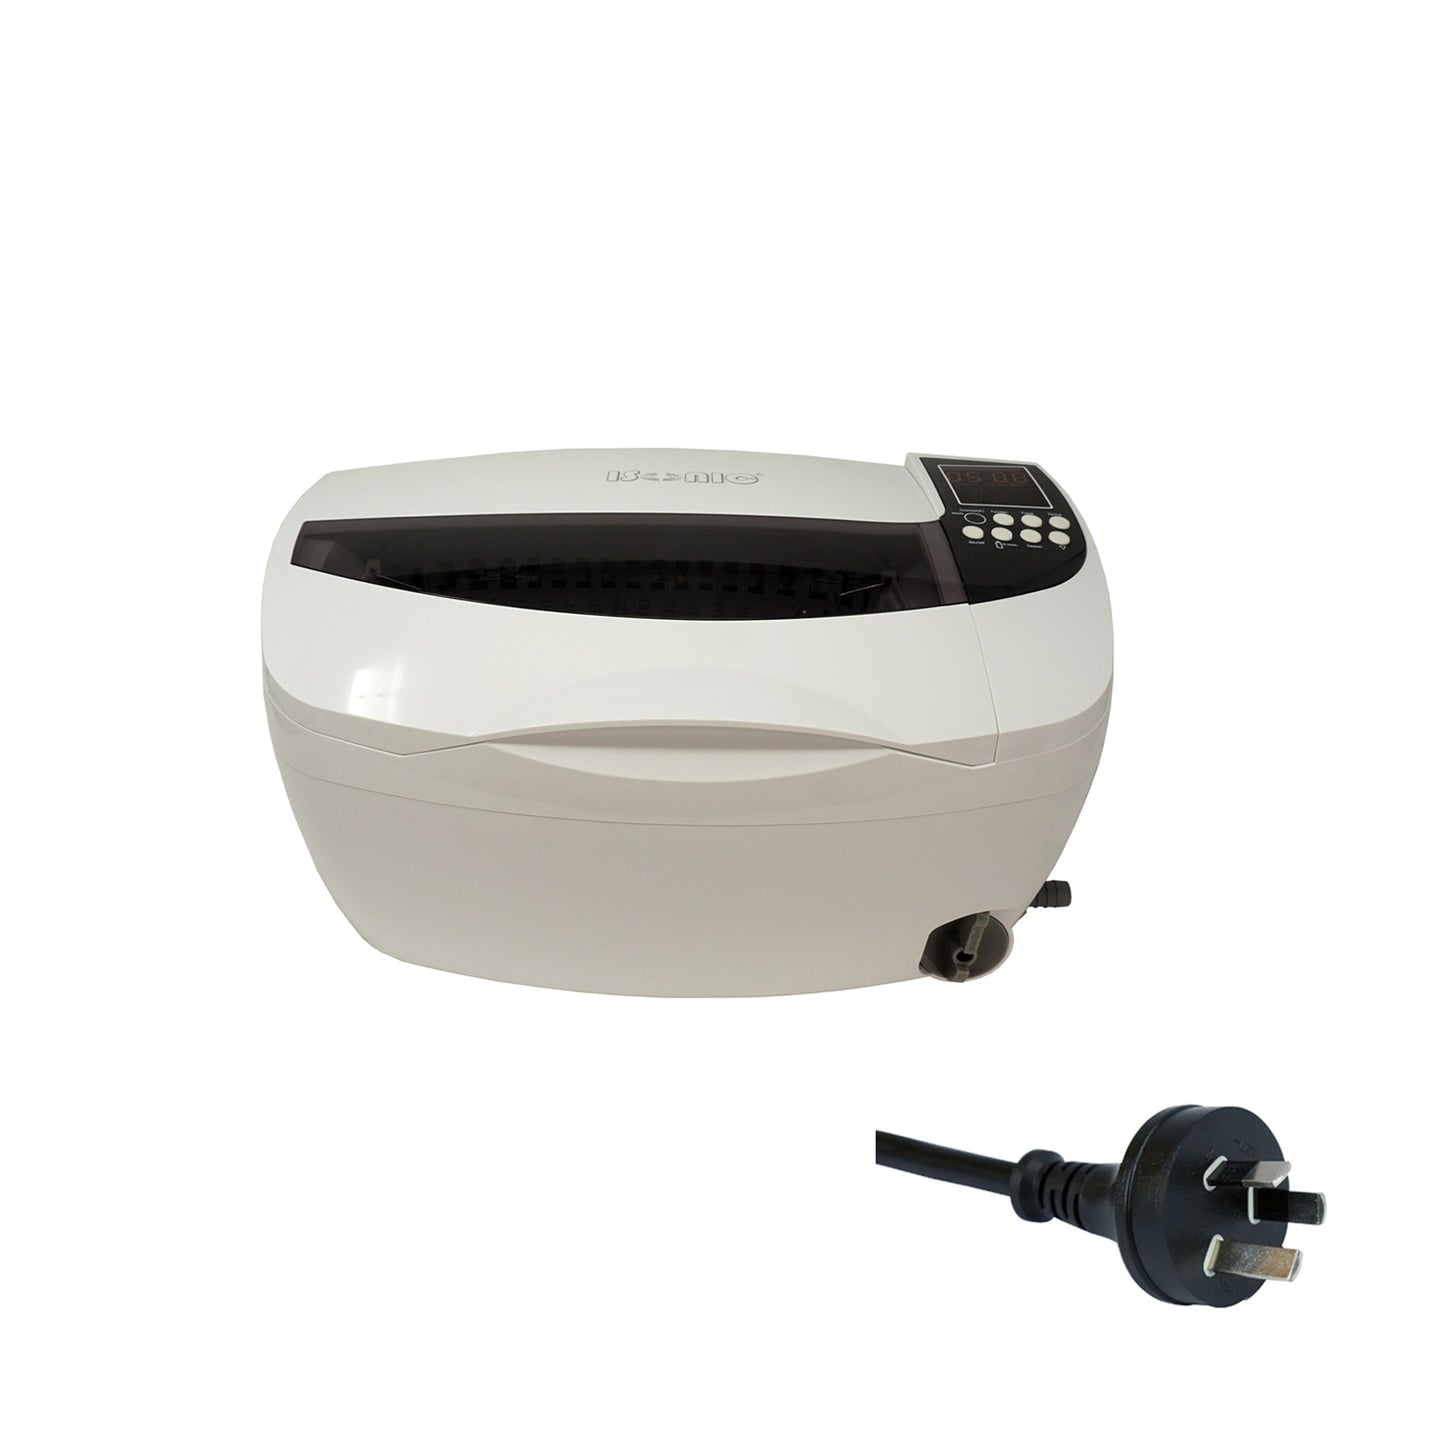 P4830 (almost new) | iSonic® Ultrasonic Cleaner, 3L/3.2Qt, 110V 60W ultrasonic stack transducer, 30-minute timer. Free Shipping!